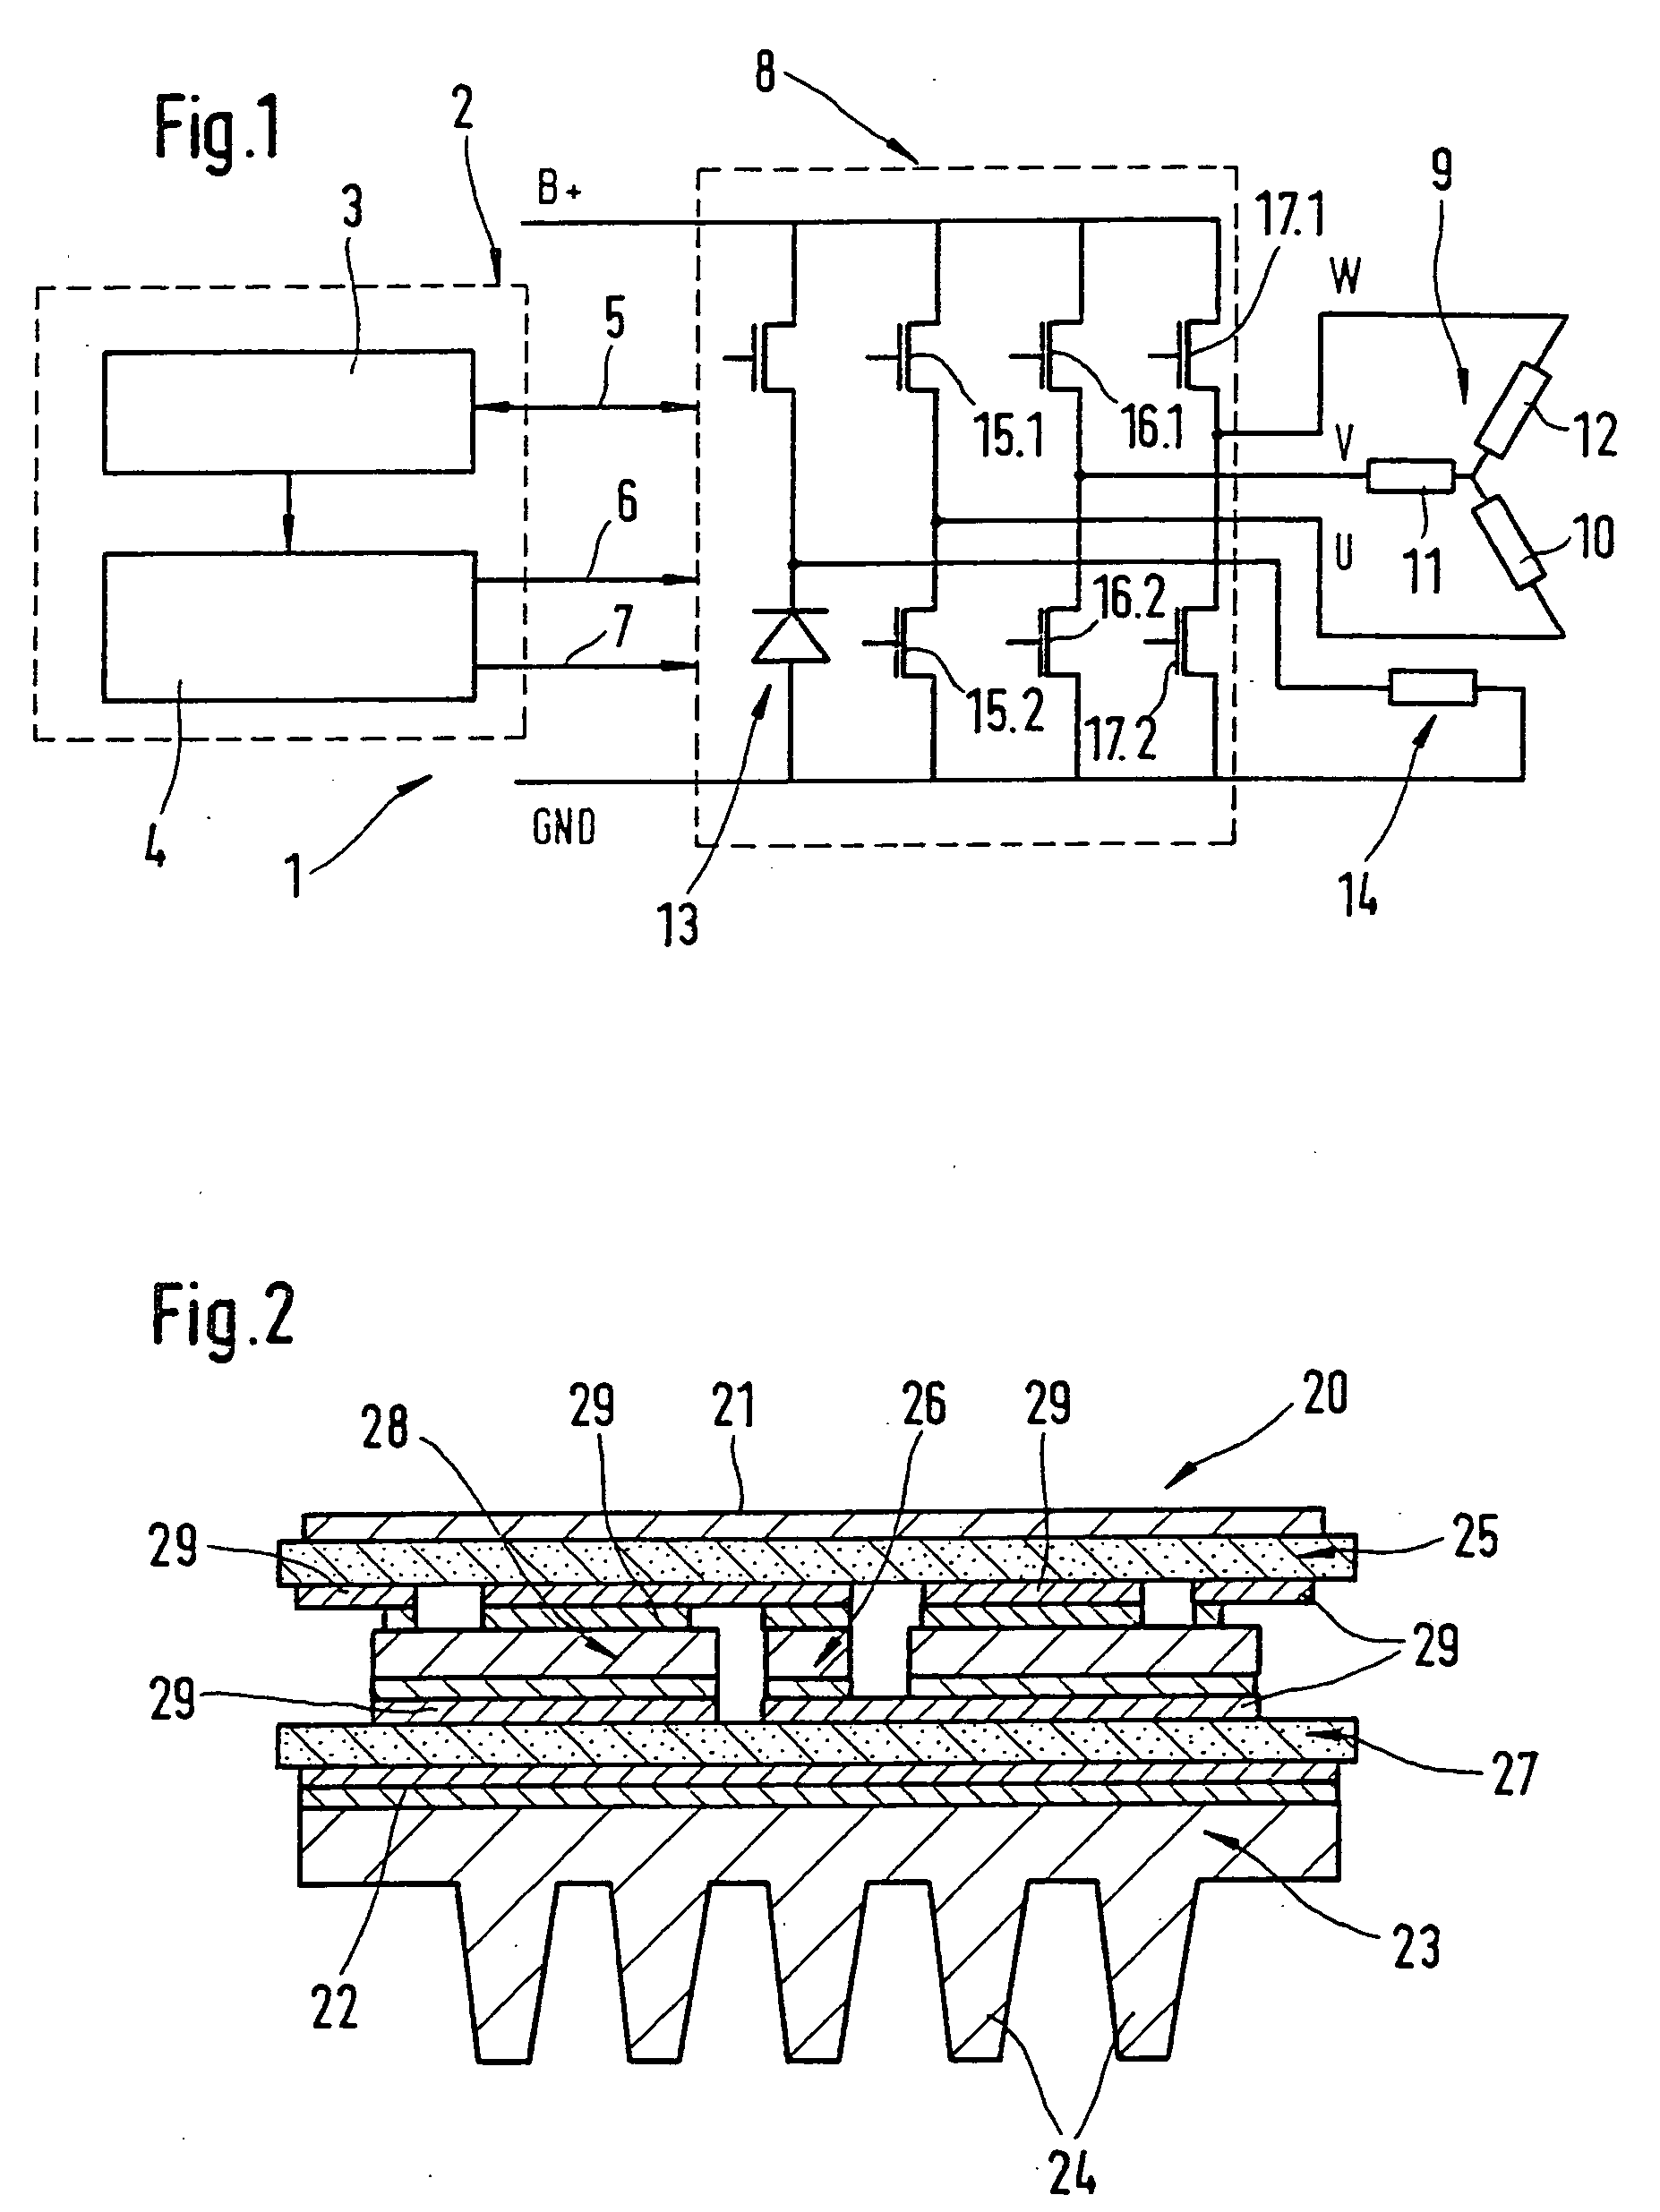 Active rectifier module for three-phase generators of vehicles